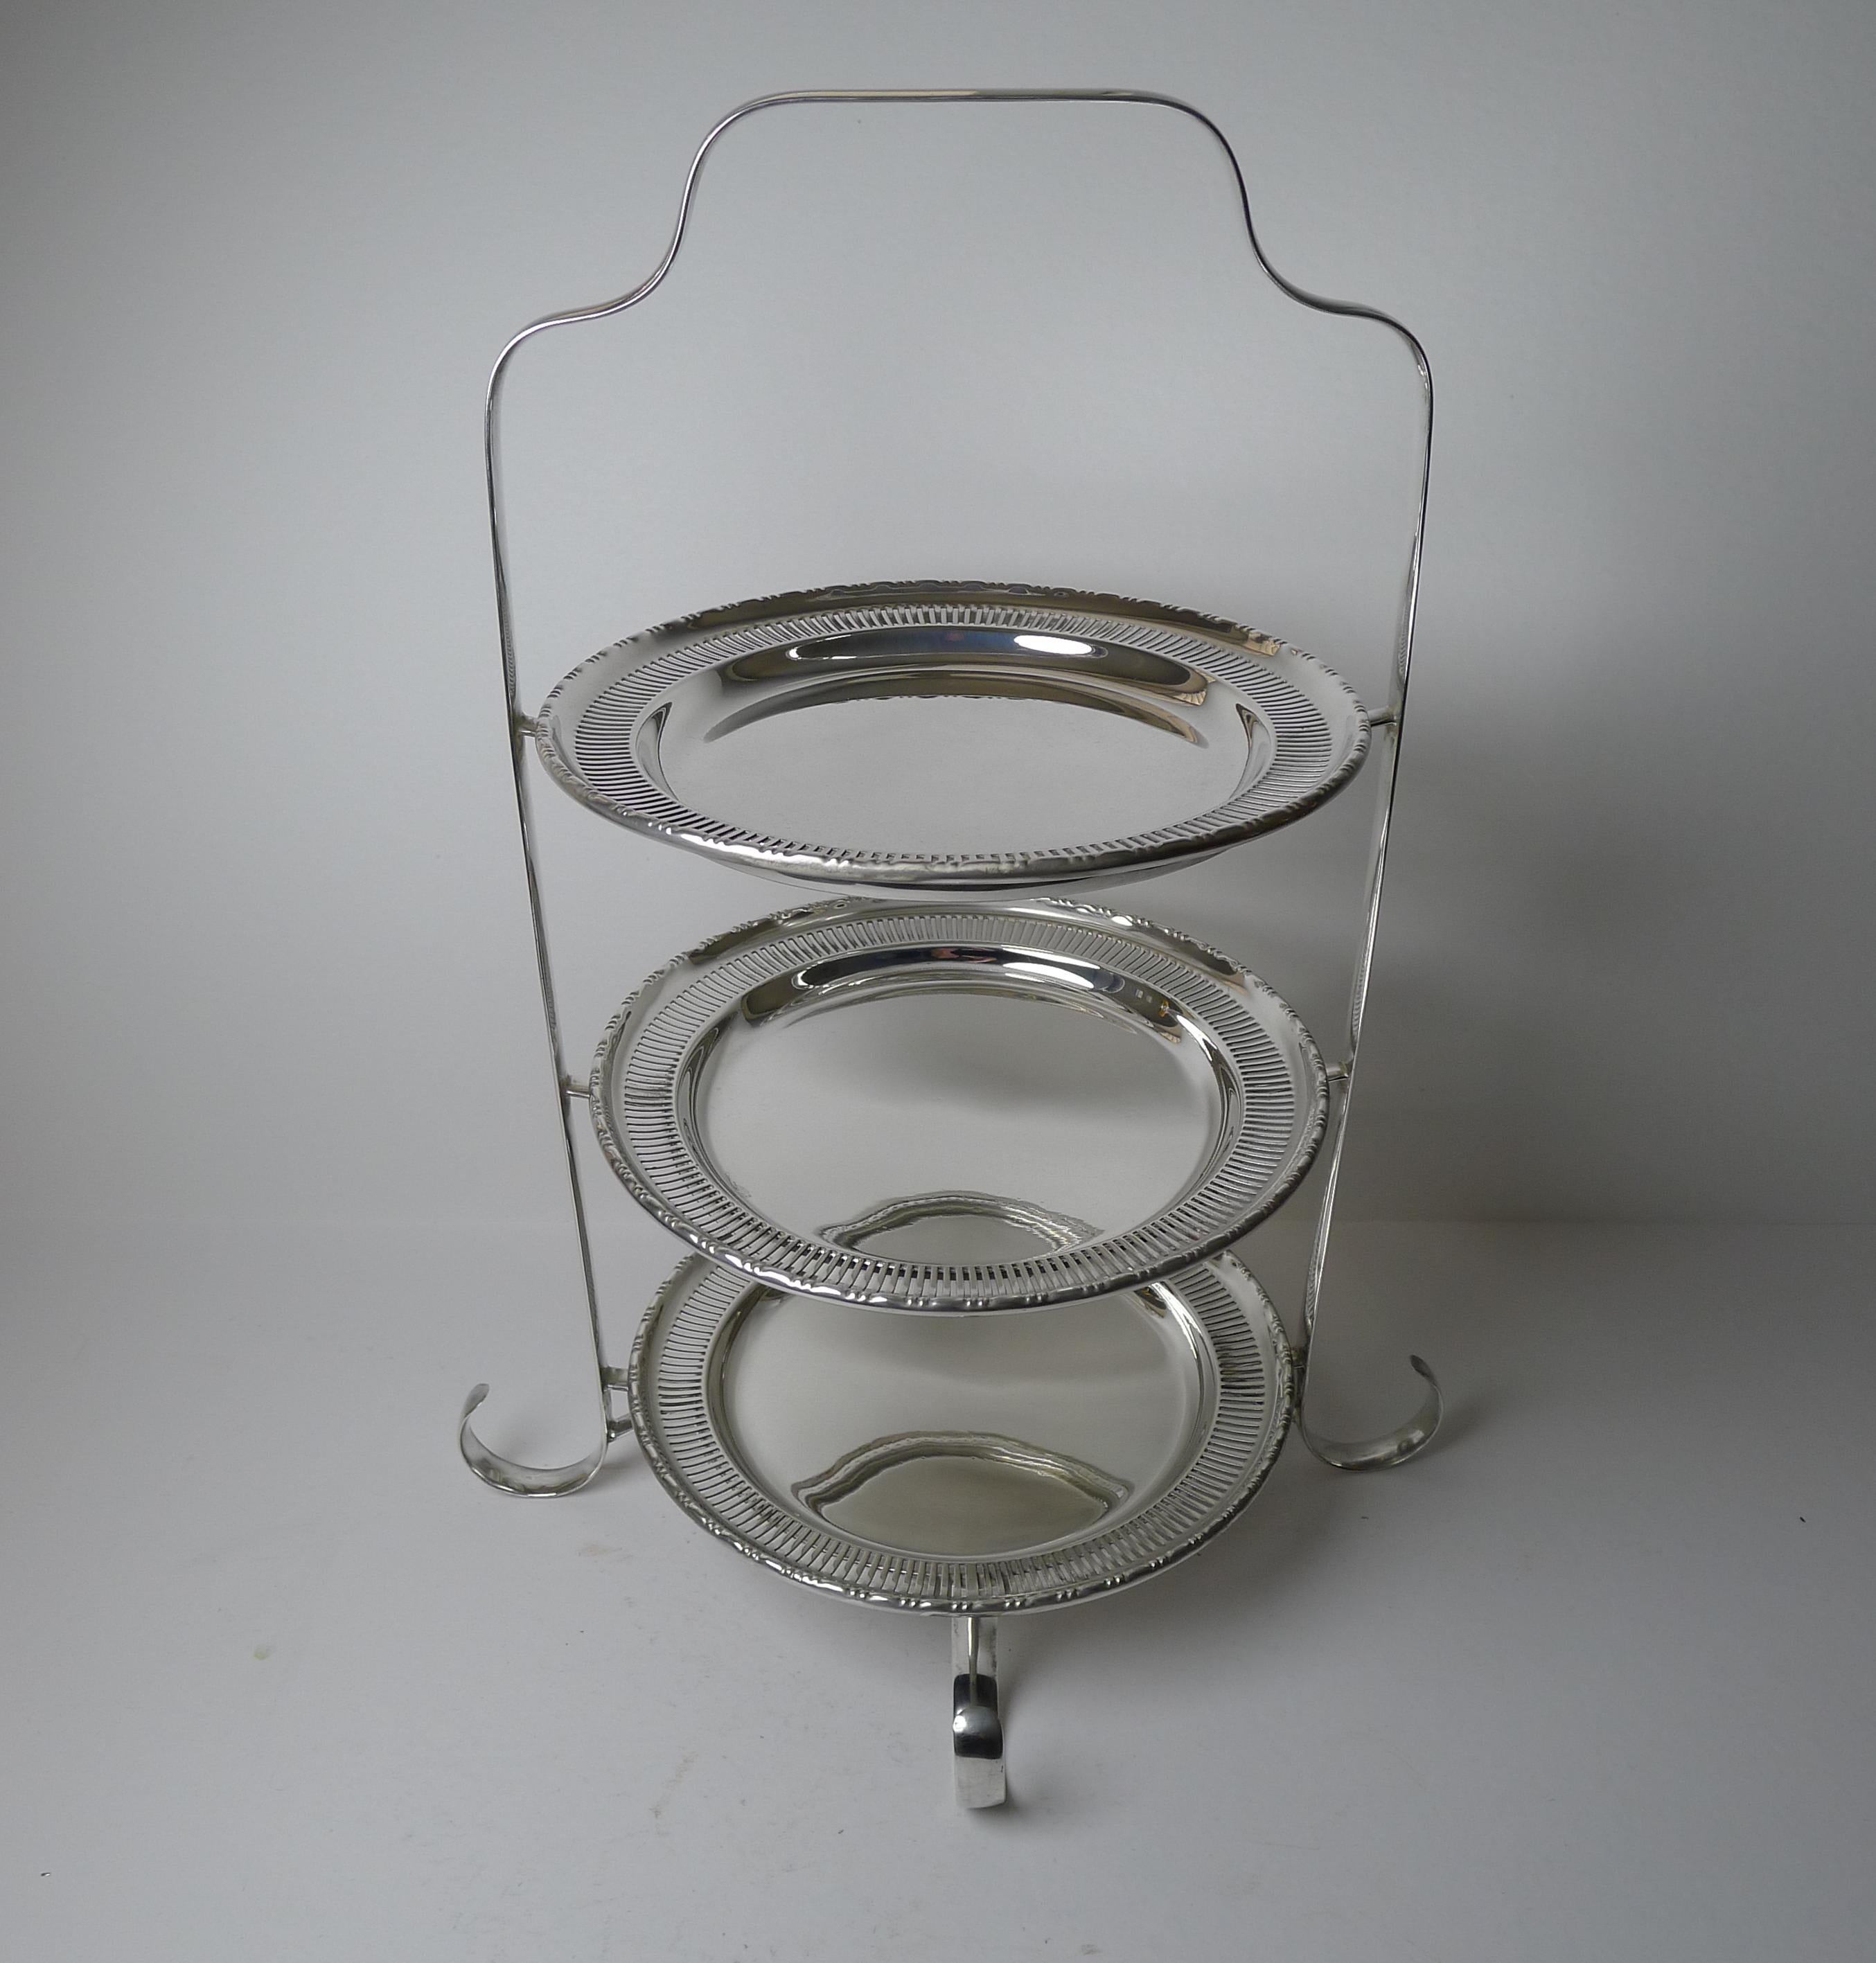 English Art Deco Silver Plated Cake Stand c.1930 1